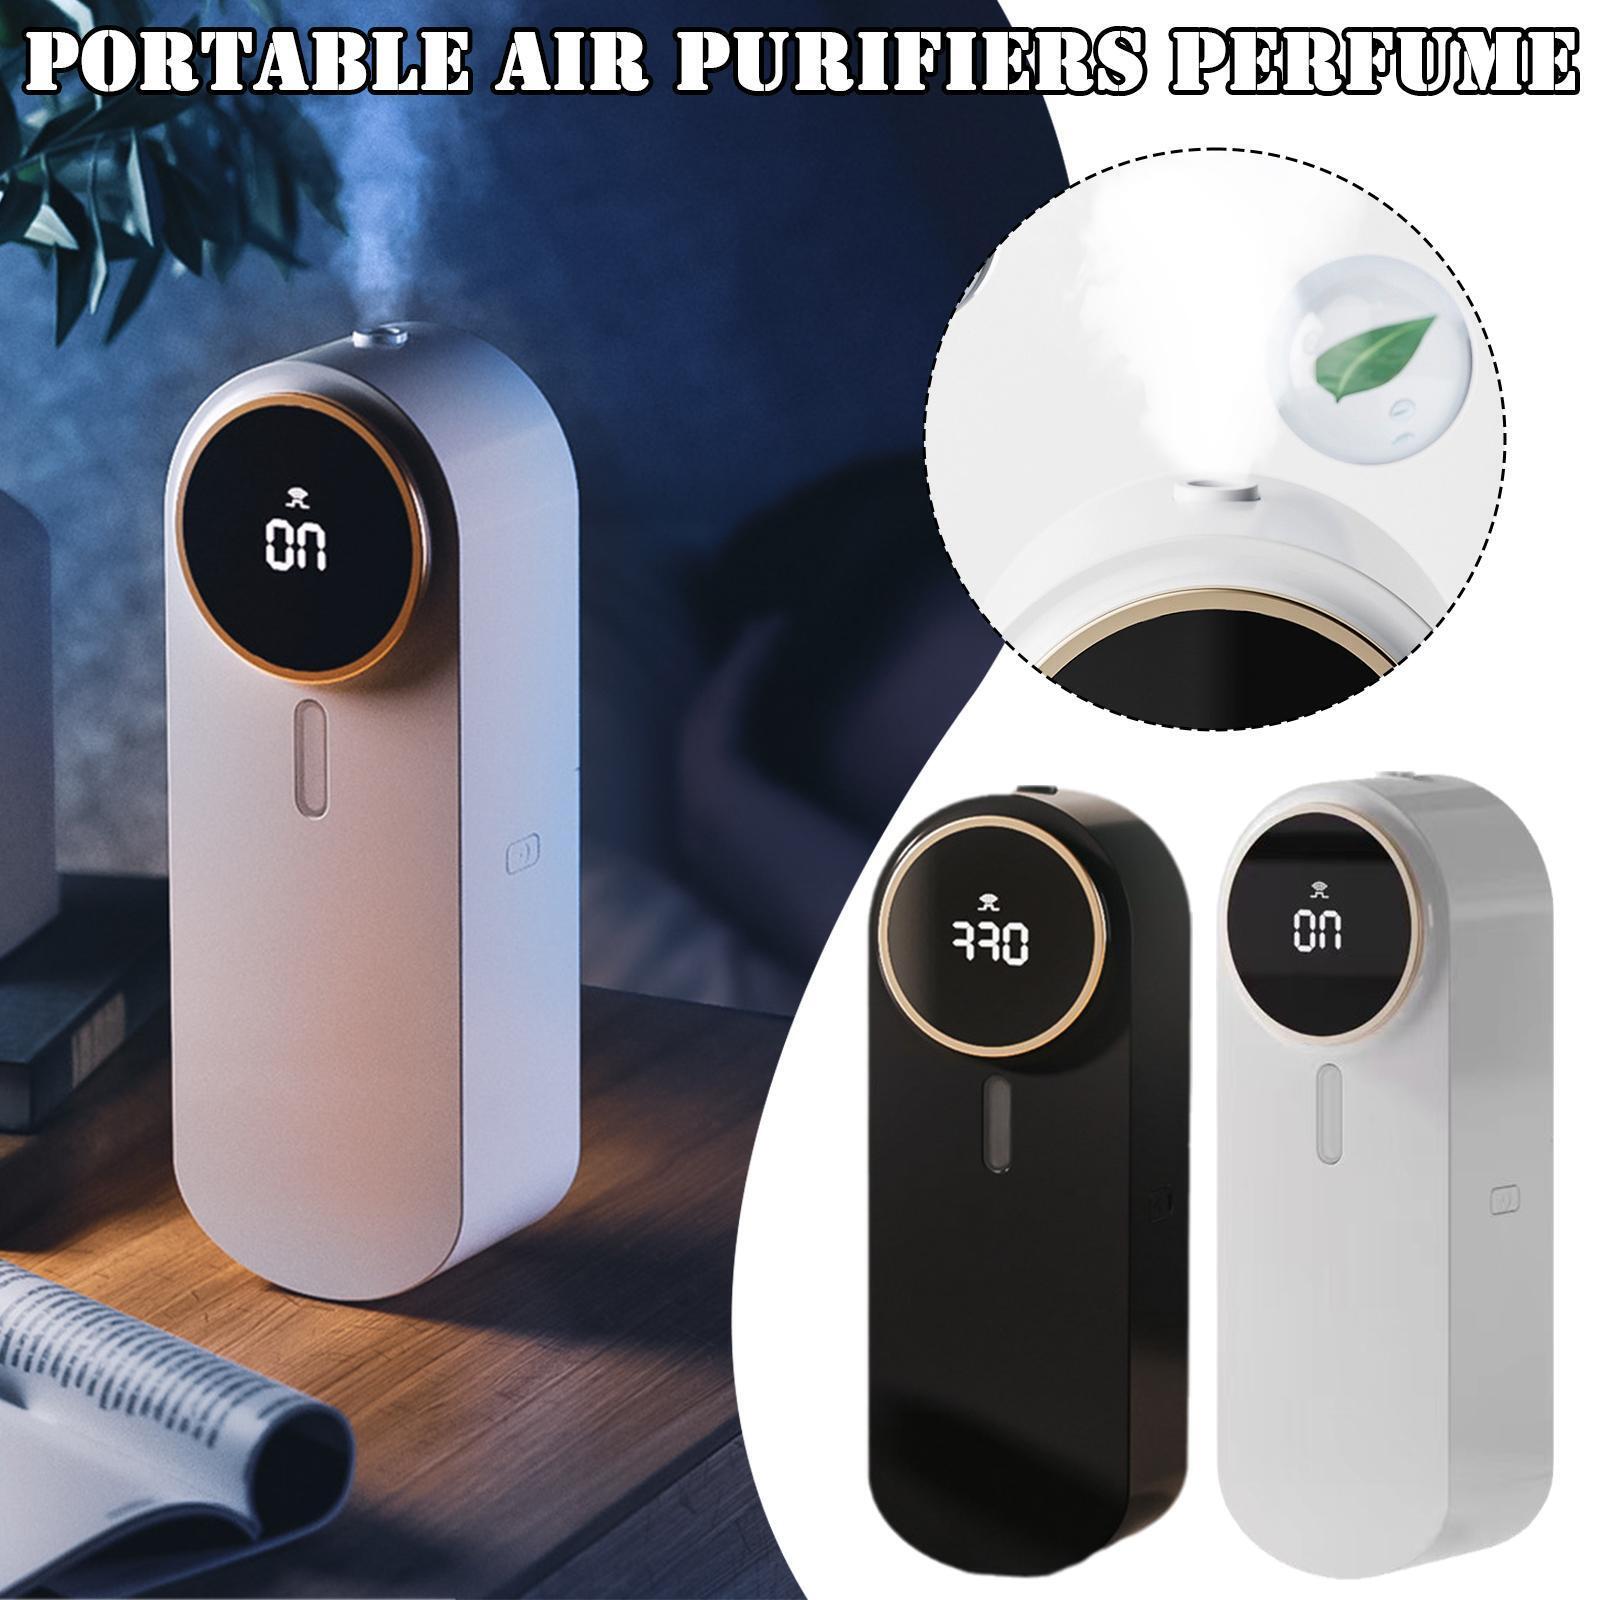 Portable Air Purifiers Perfume Diffuser Screen Display Room Wall Mounted P3w4